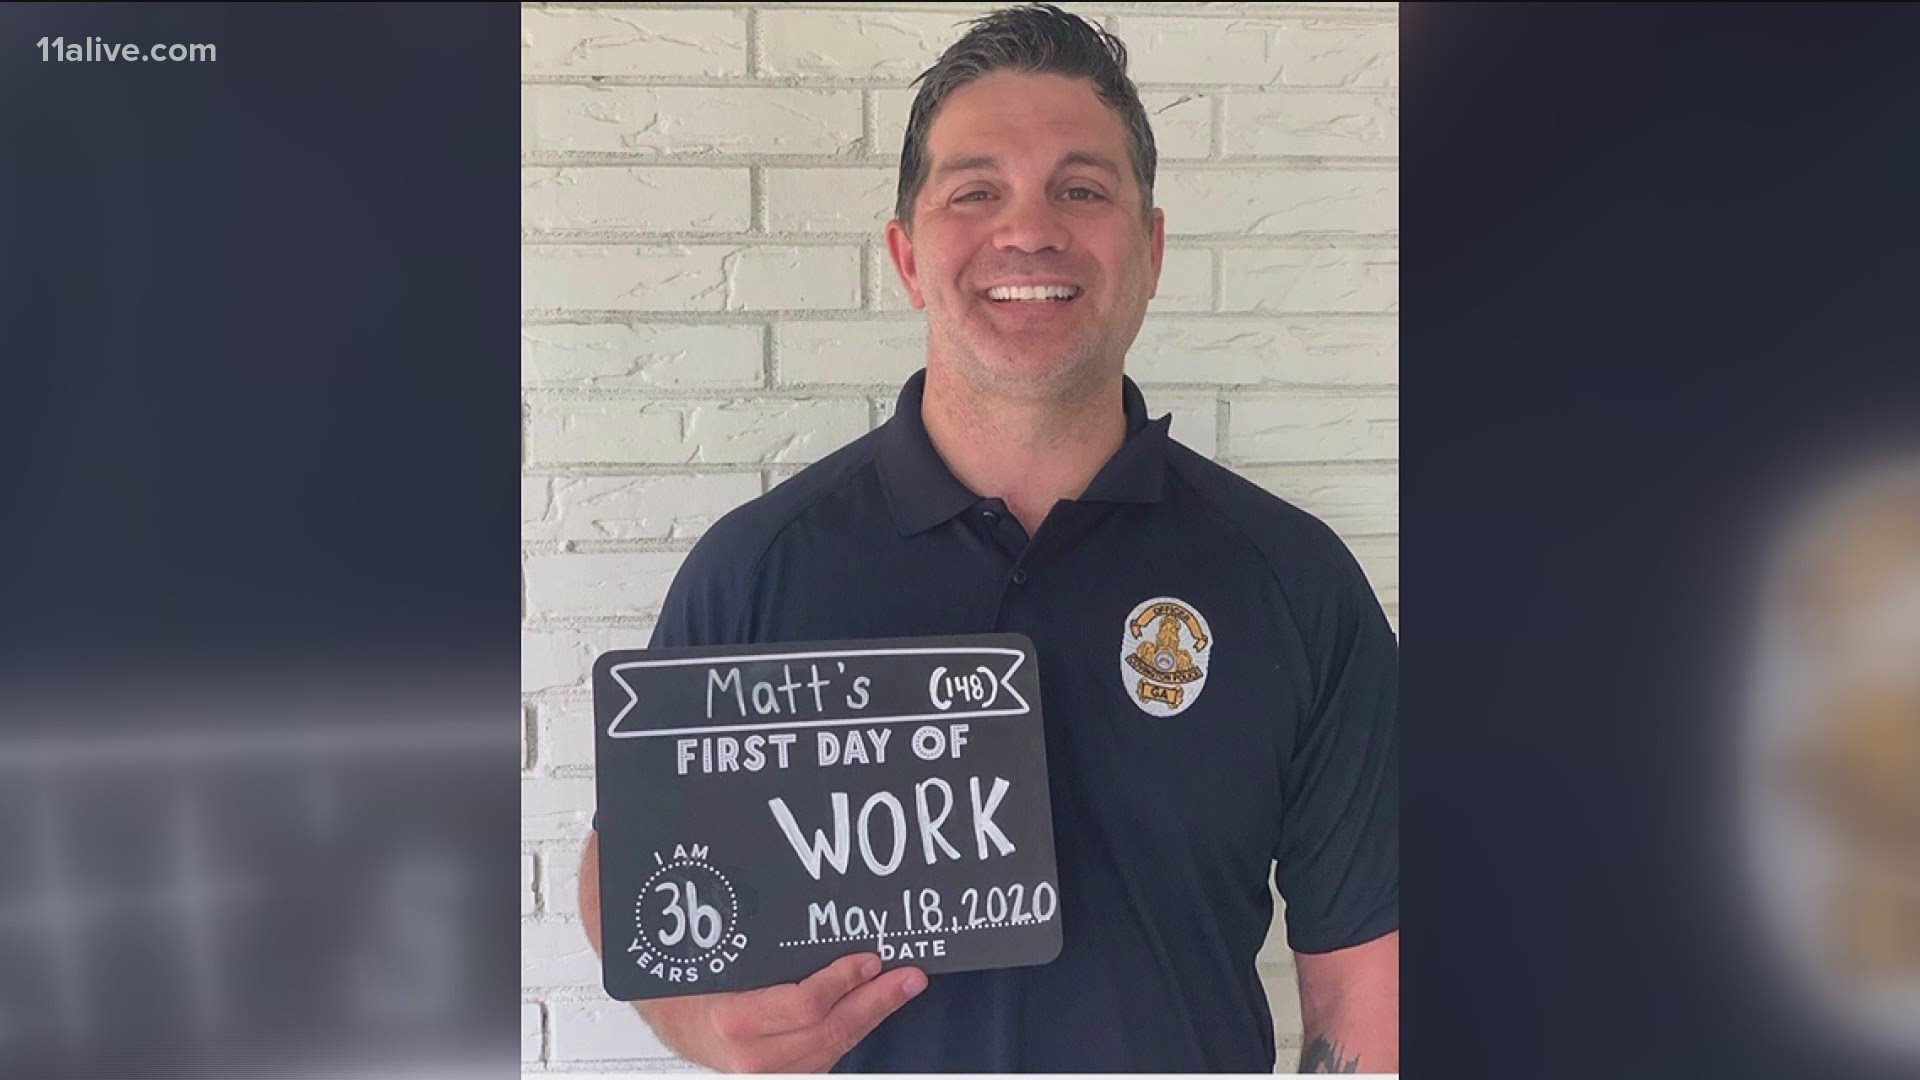 Officer Matt Cooper was shot between the eyes in the line of duty in September of 2018. His recovery since then has been miraculous.